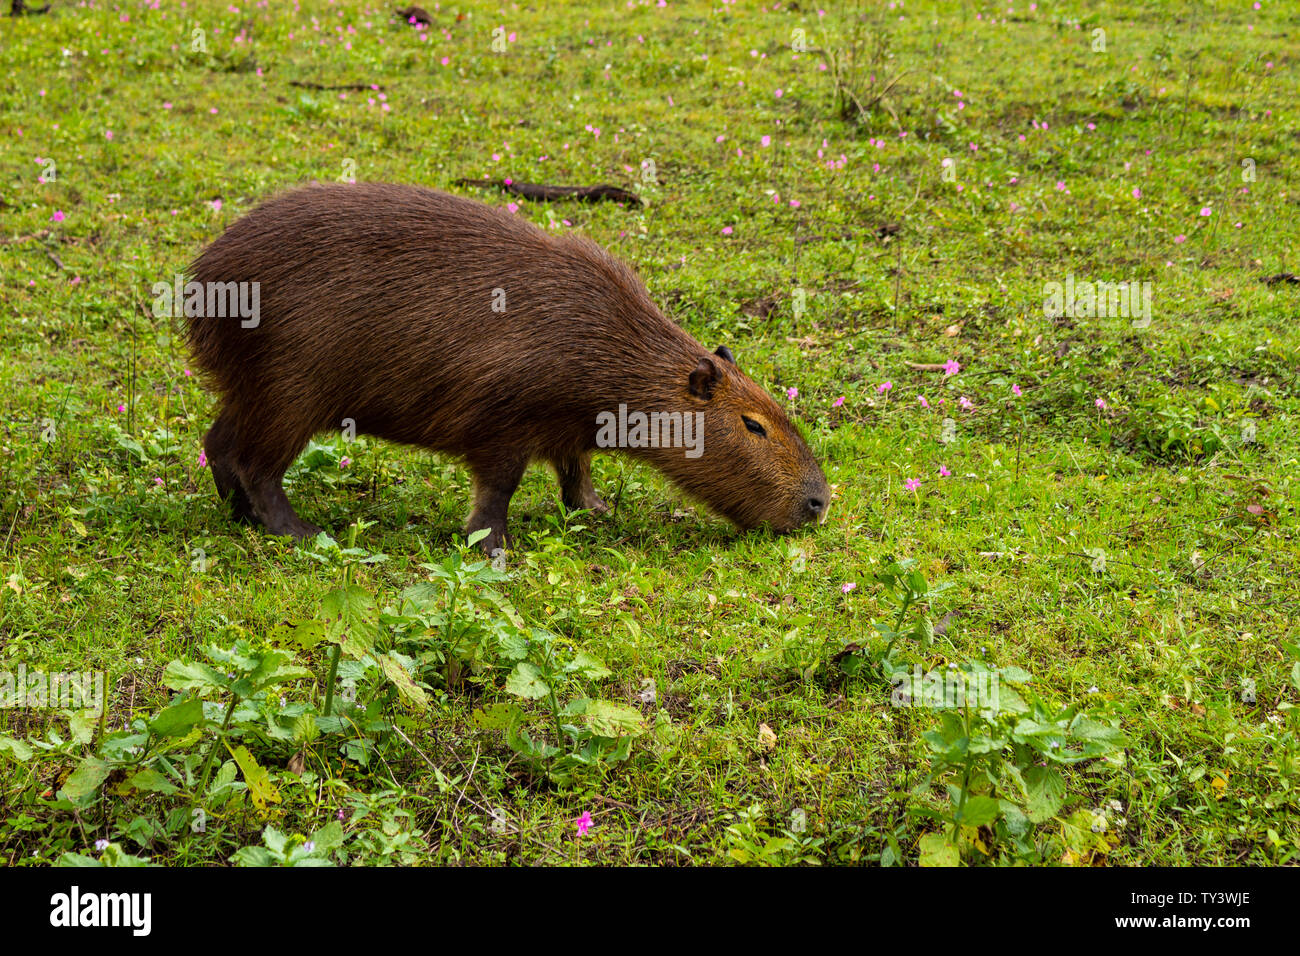 Large herbivorous animal of brown color from tropical zones. Live in the countryside and in mud puddles. Stock Photo